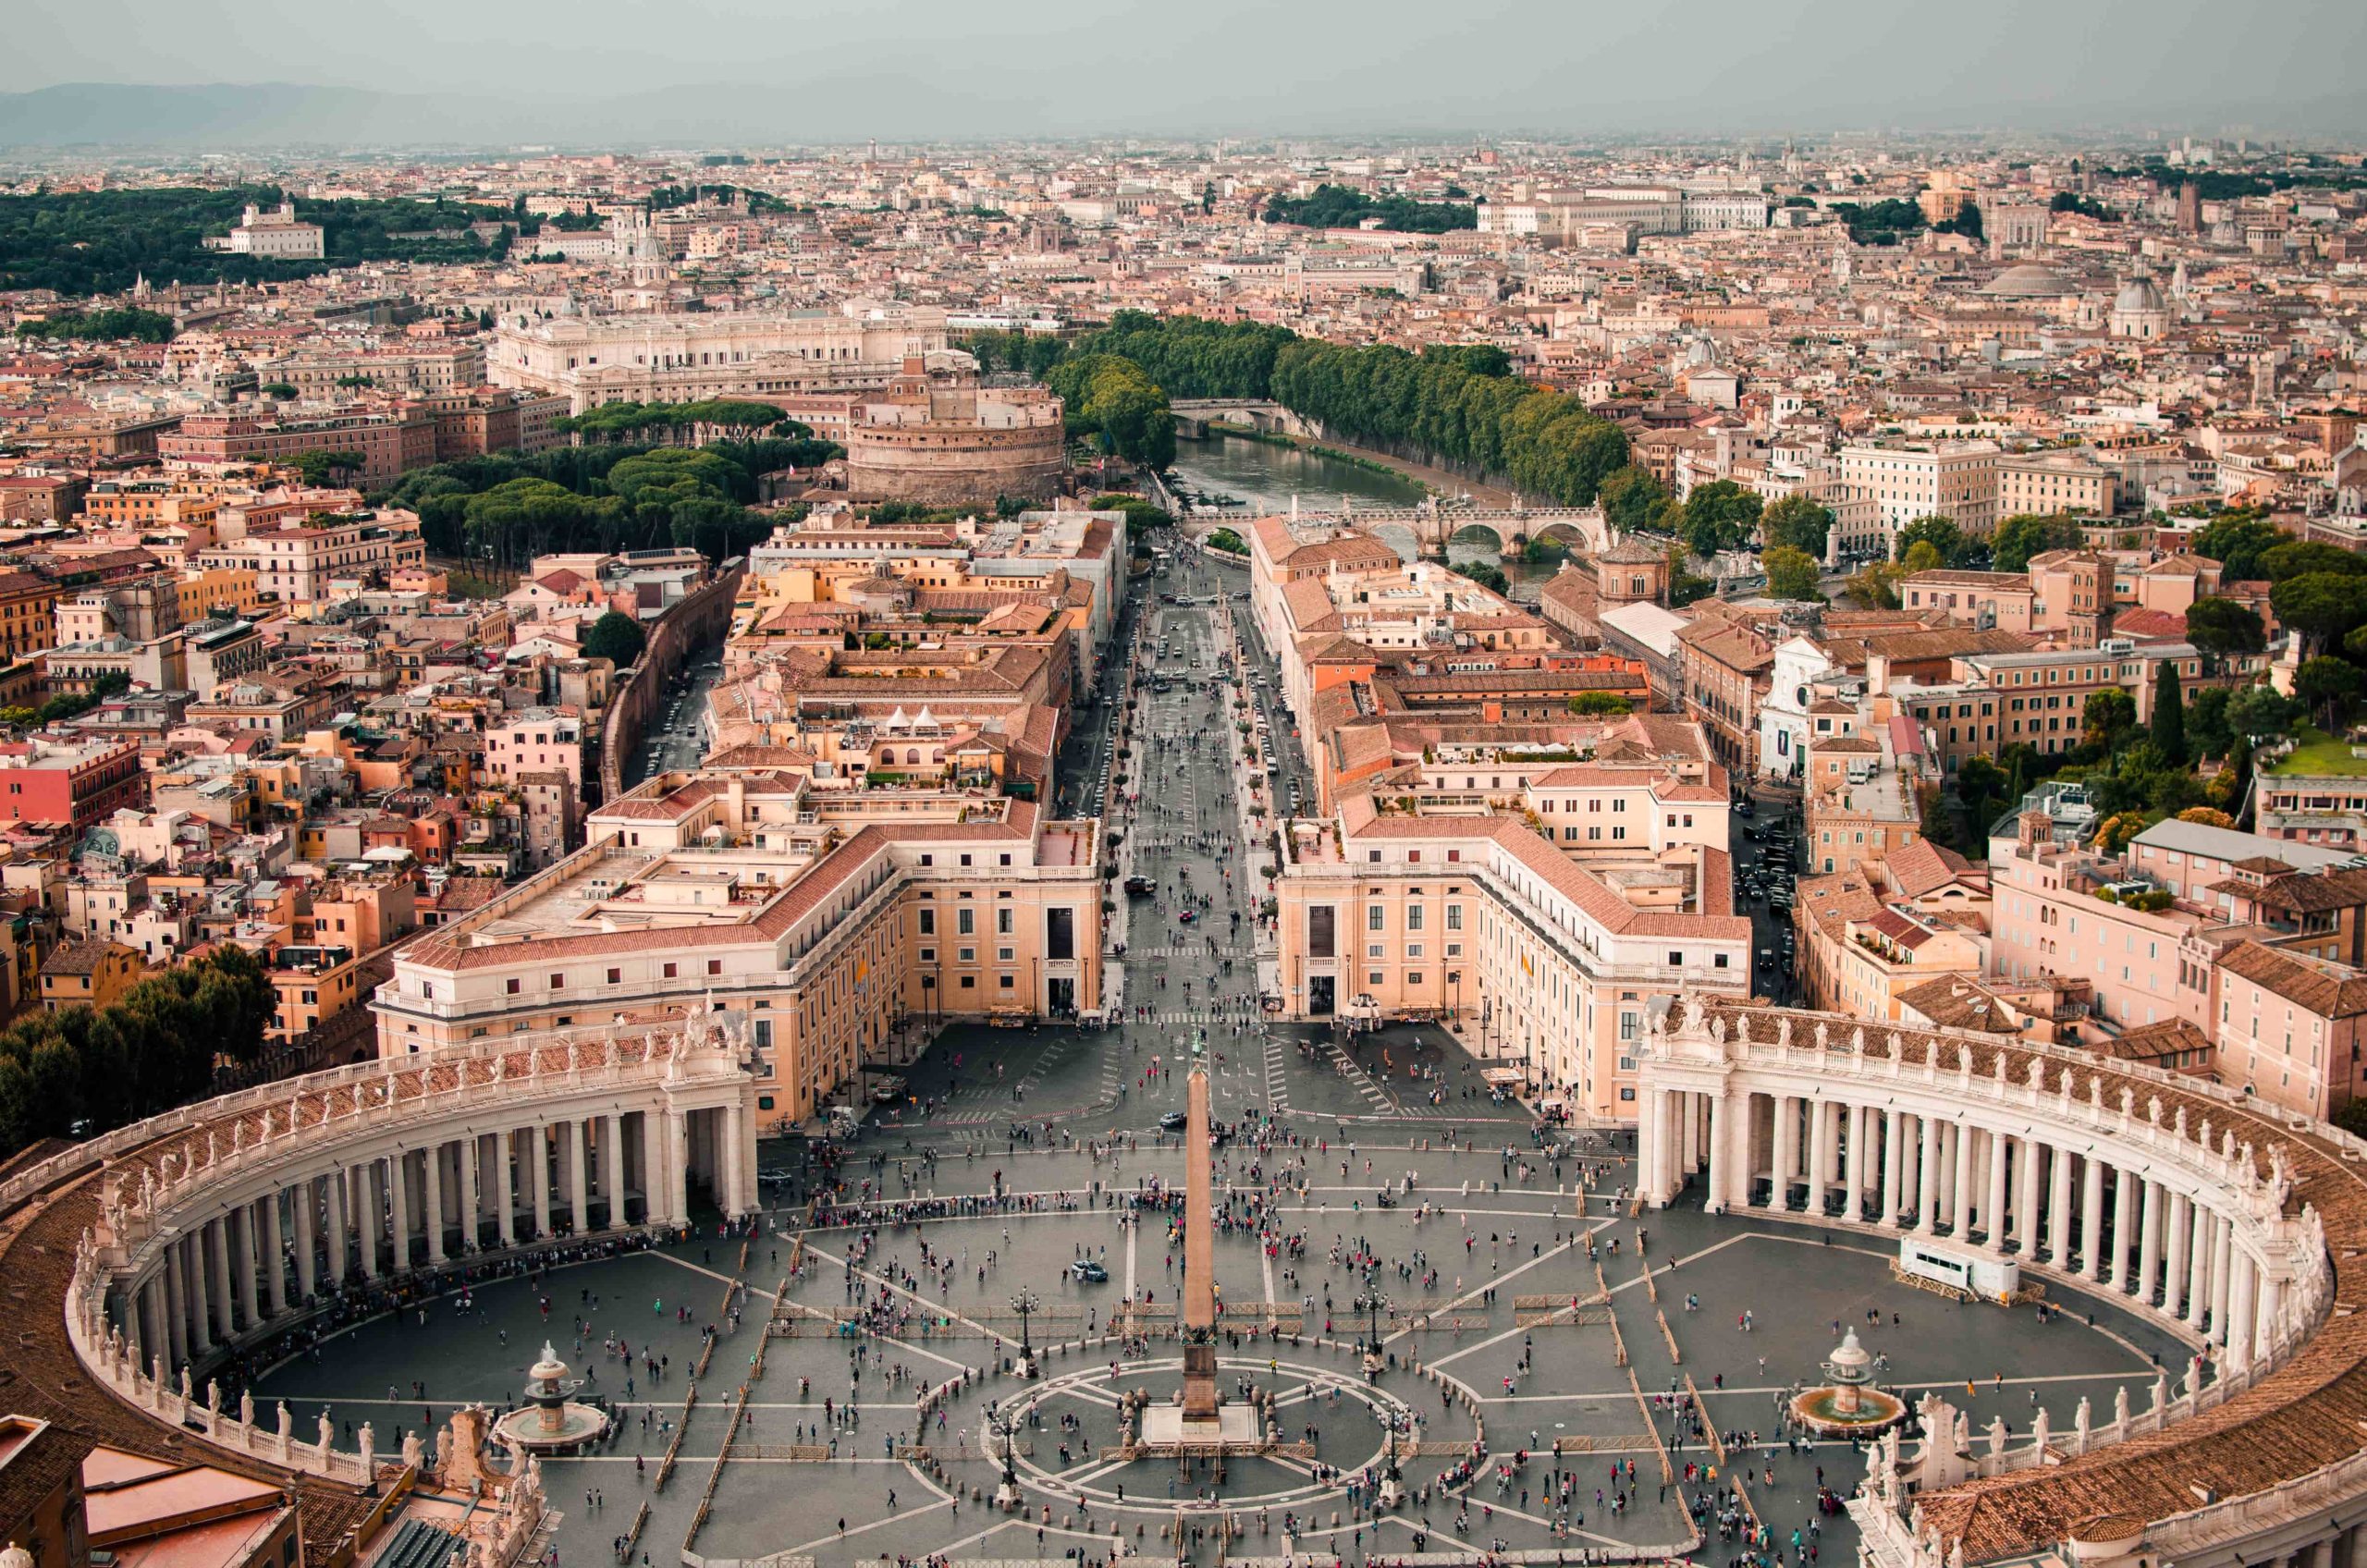 Famous square in Rome